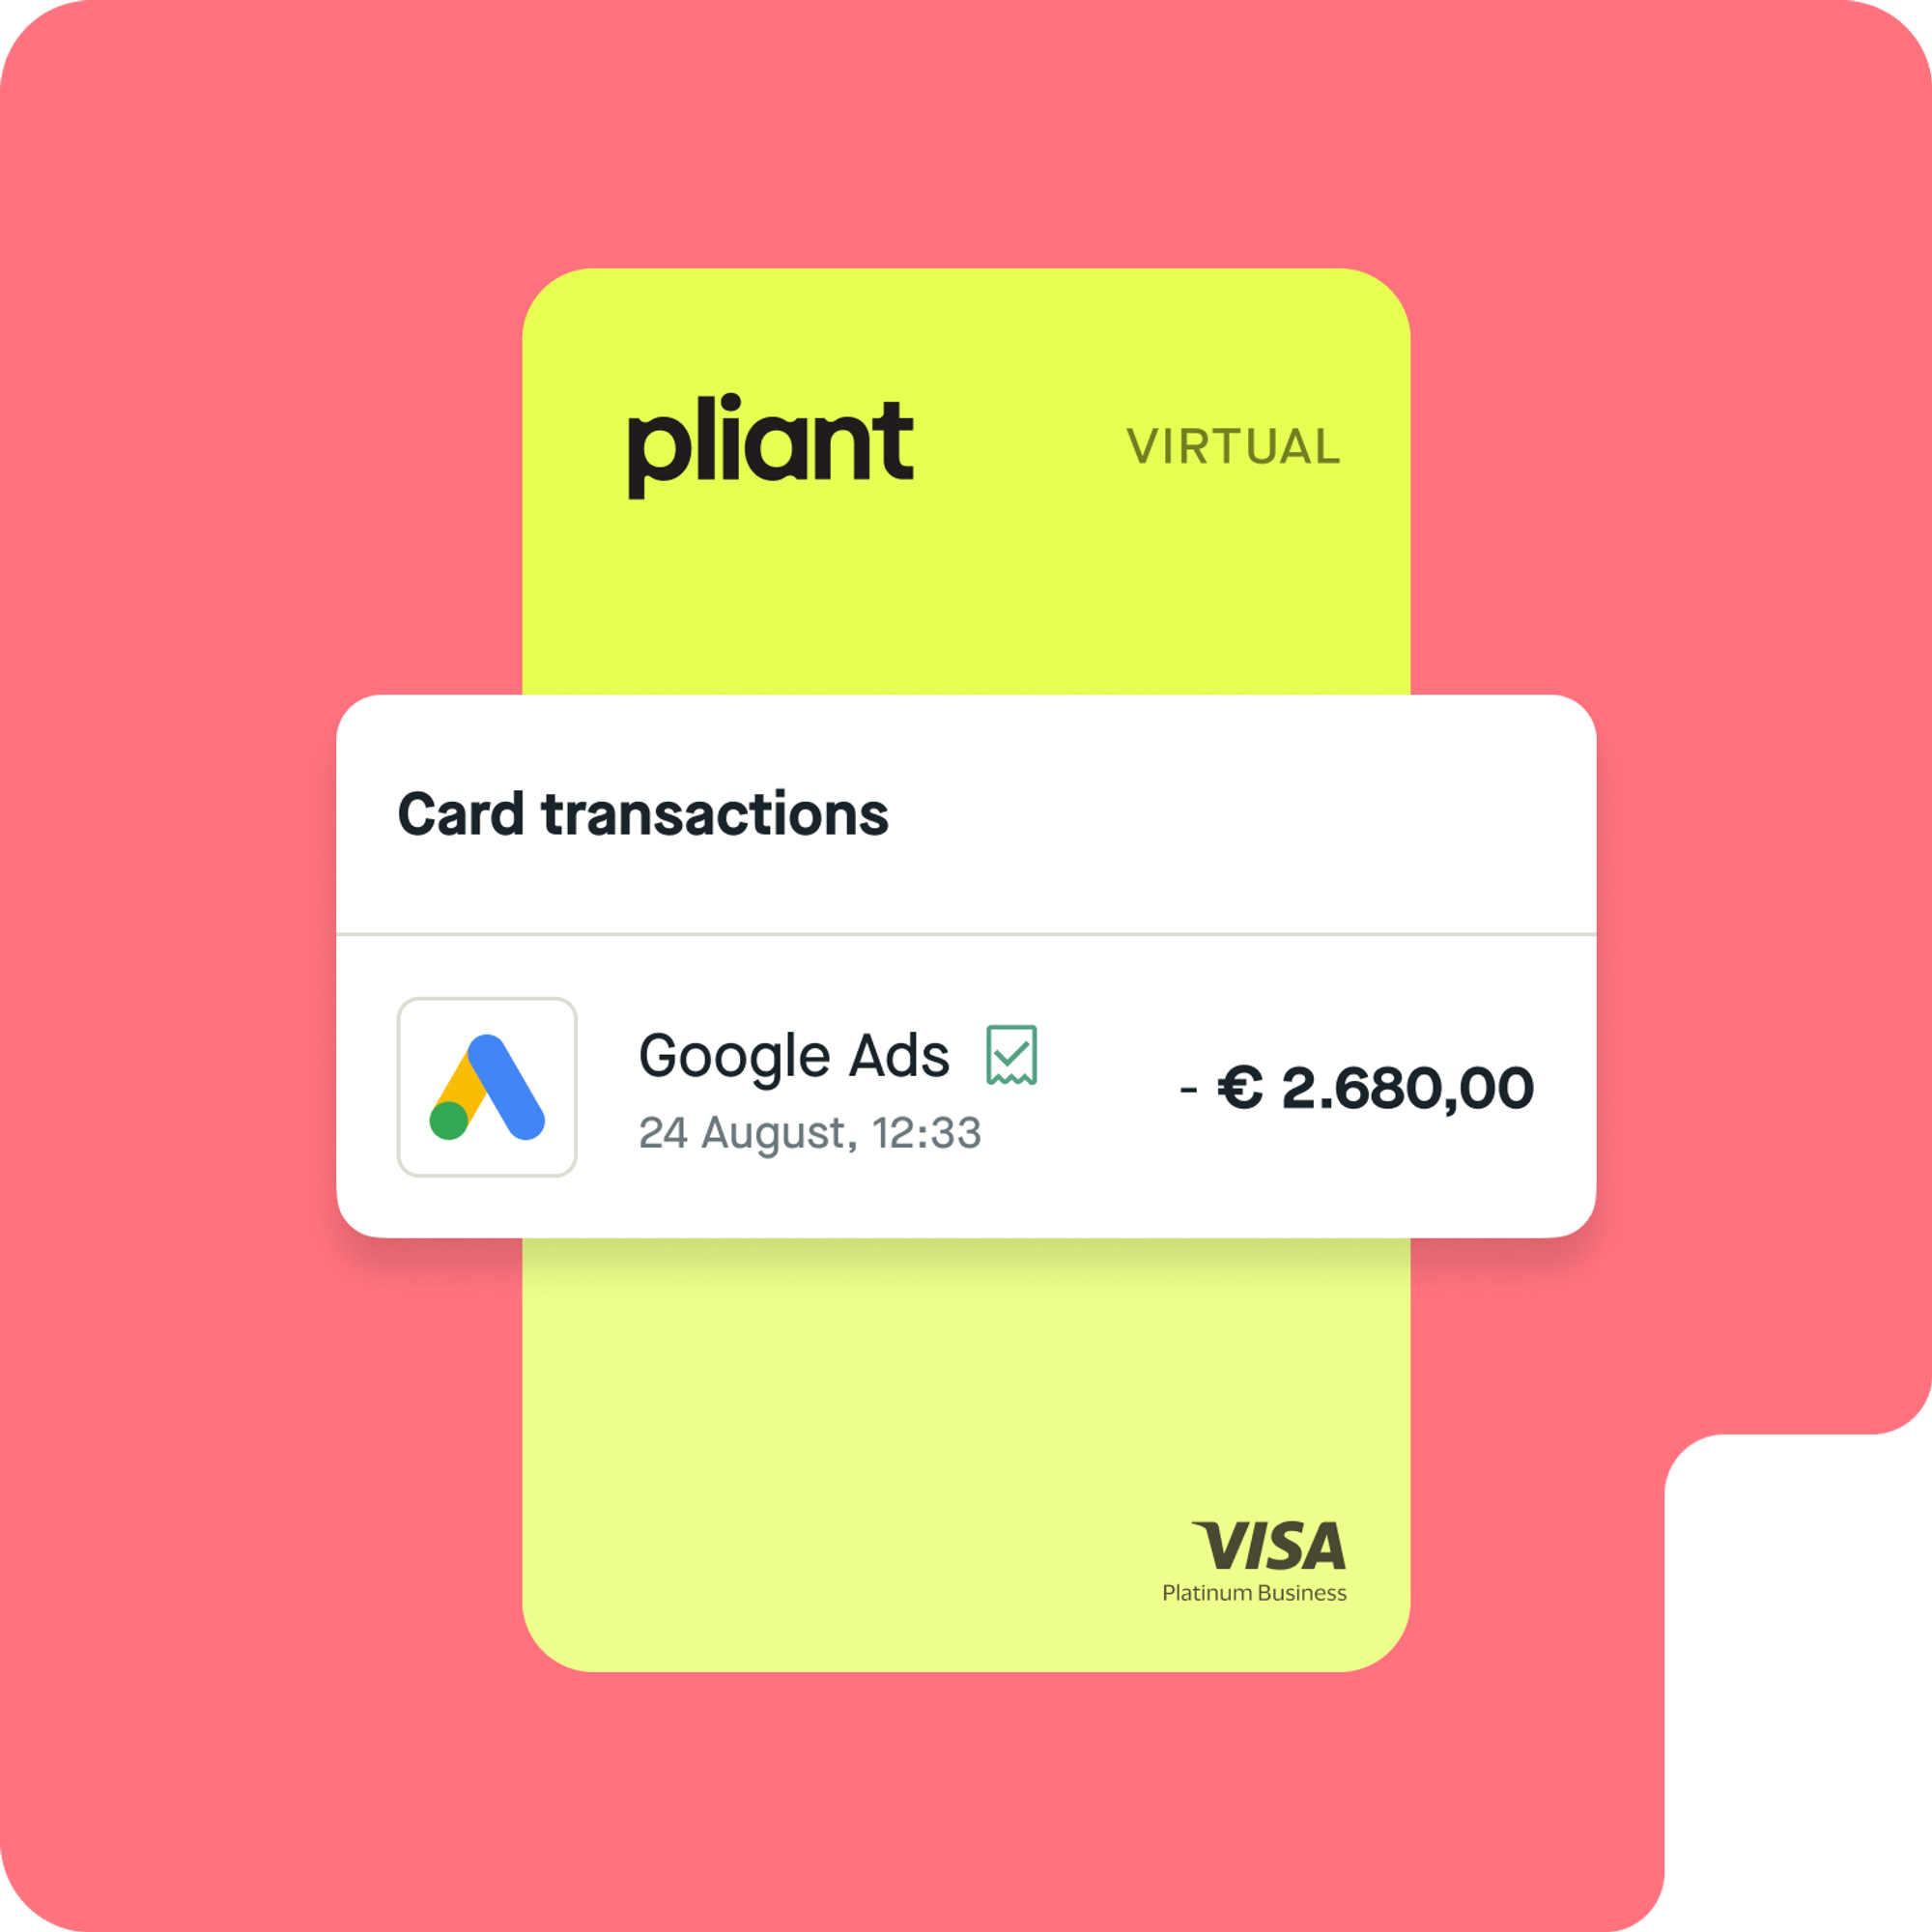 Pay for Google Ads with virtual credit cards